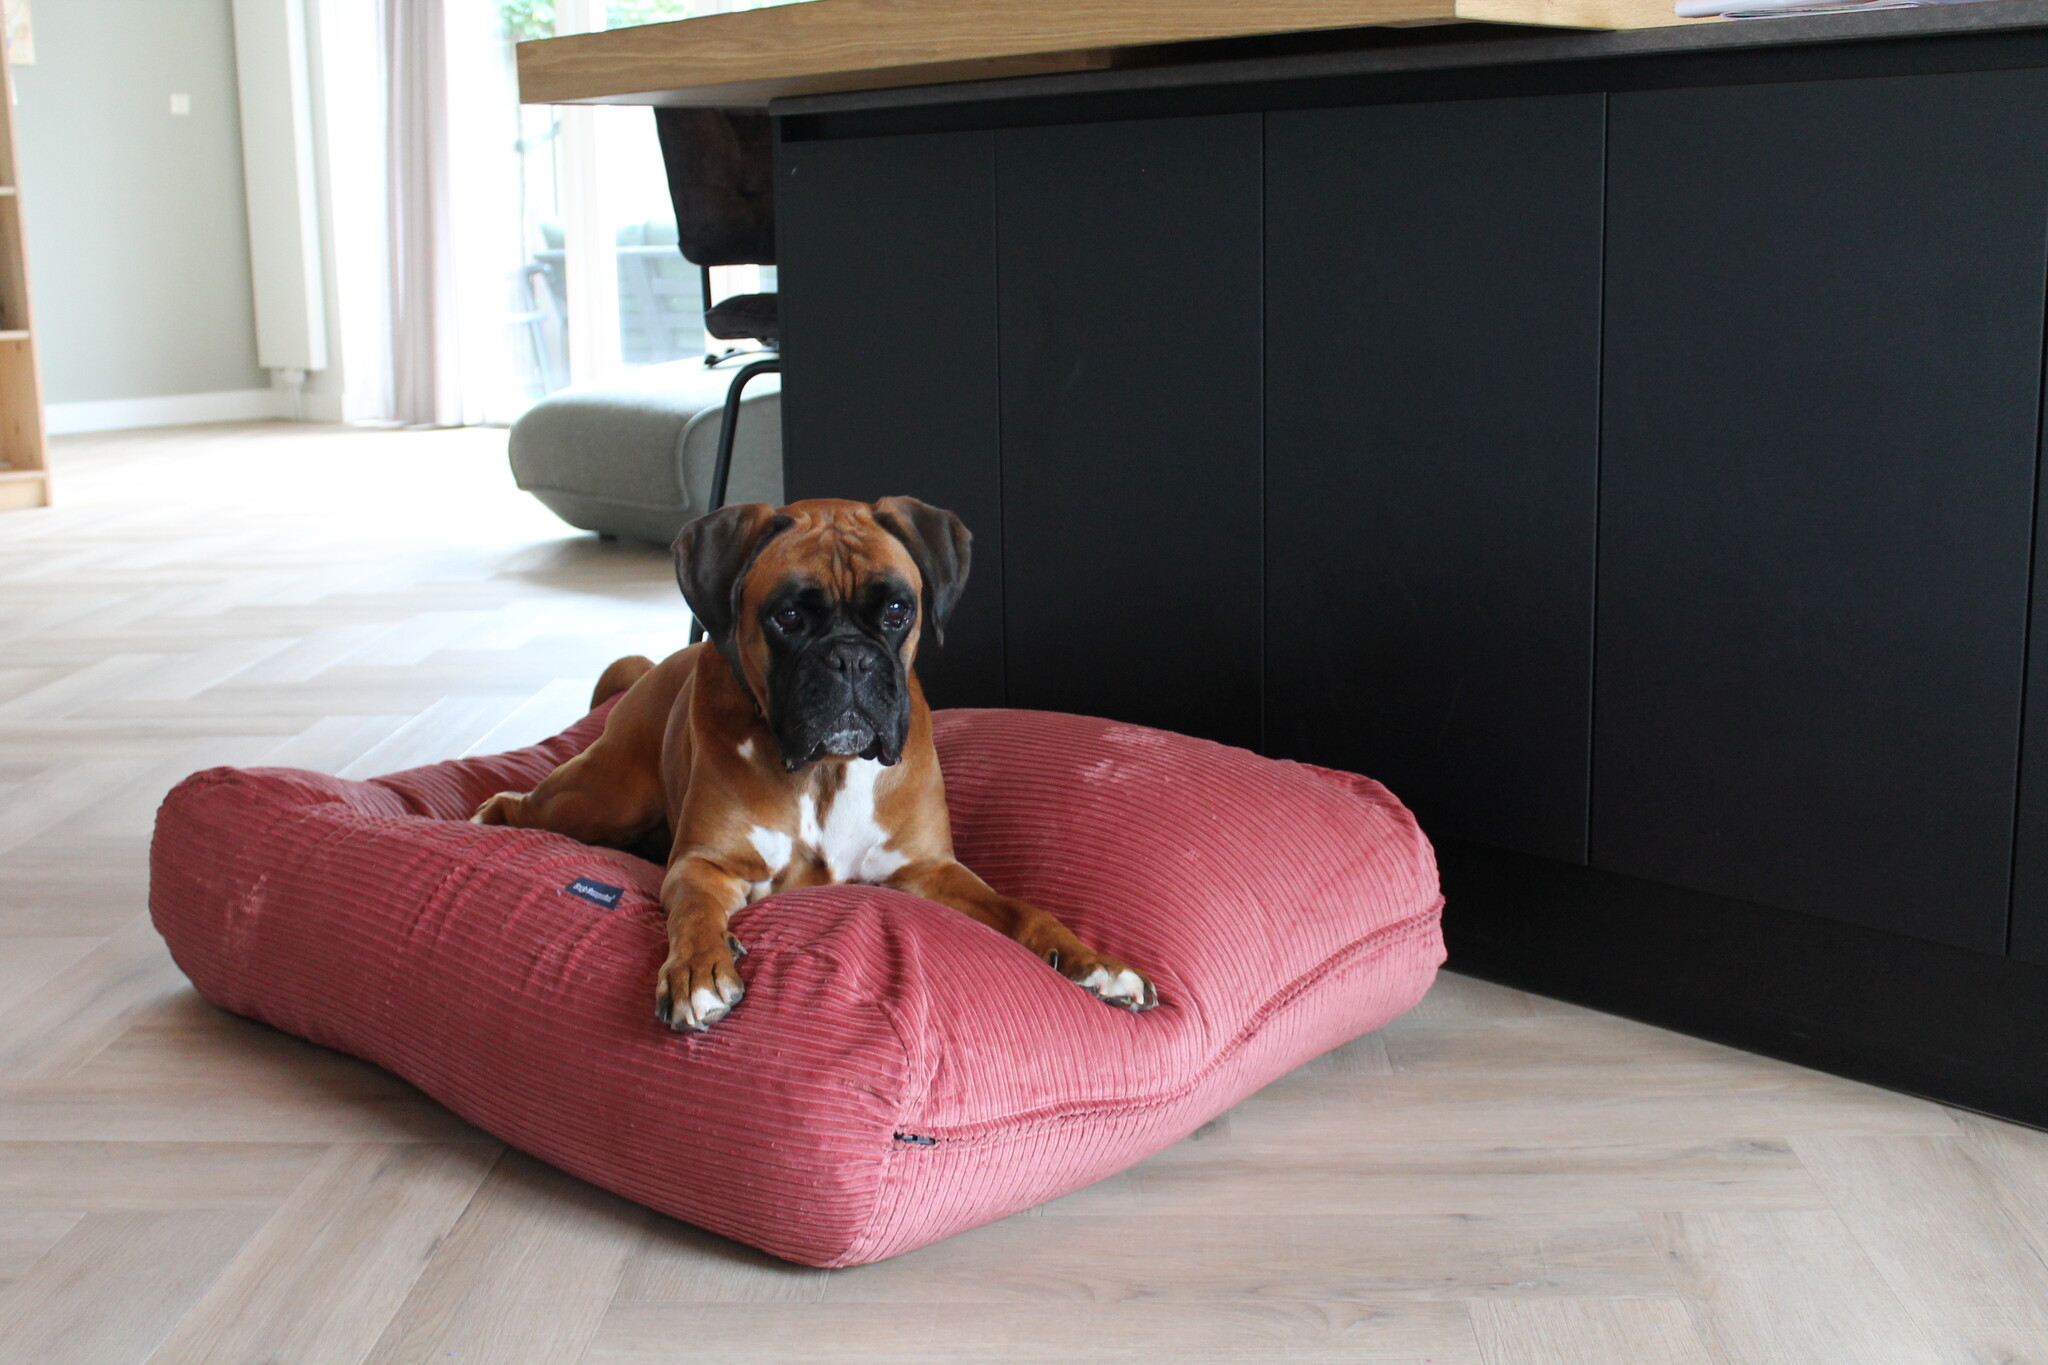 Hondenbed.nl Dog's Companion Hondenbed oud roze double ribcord